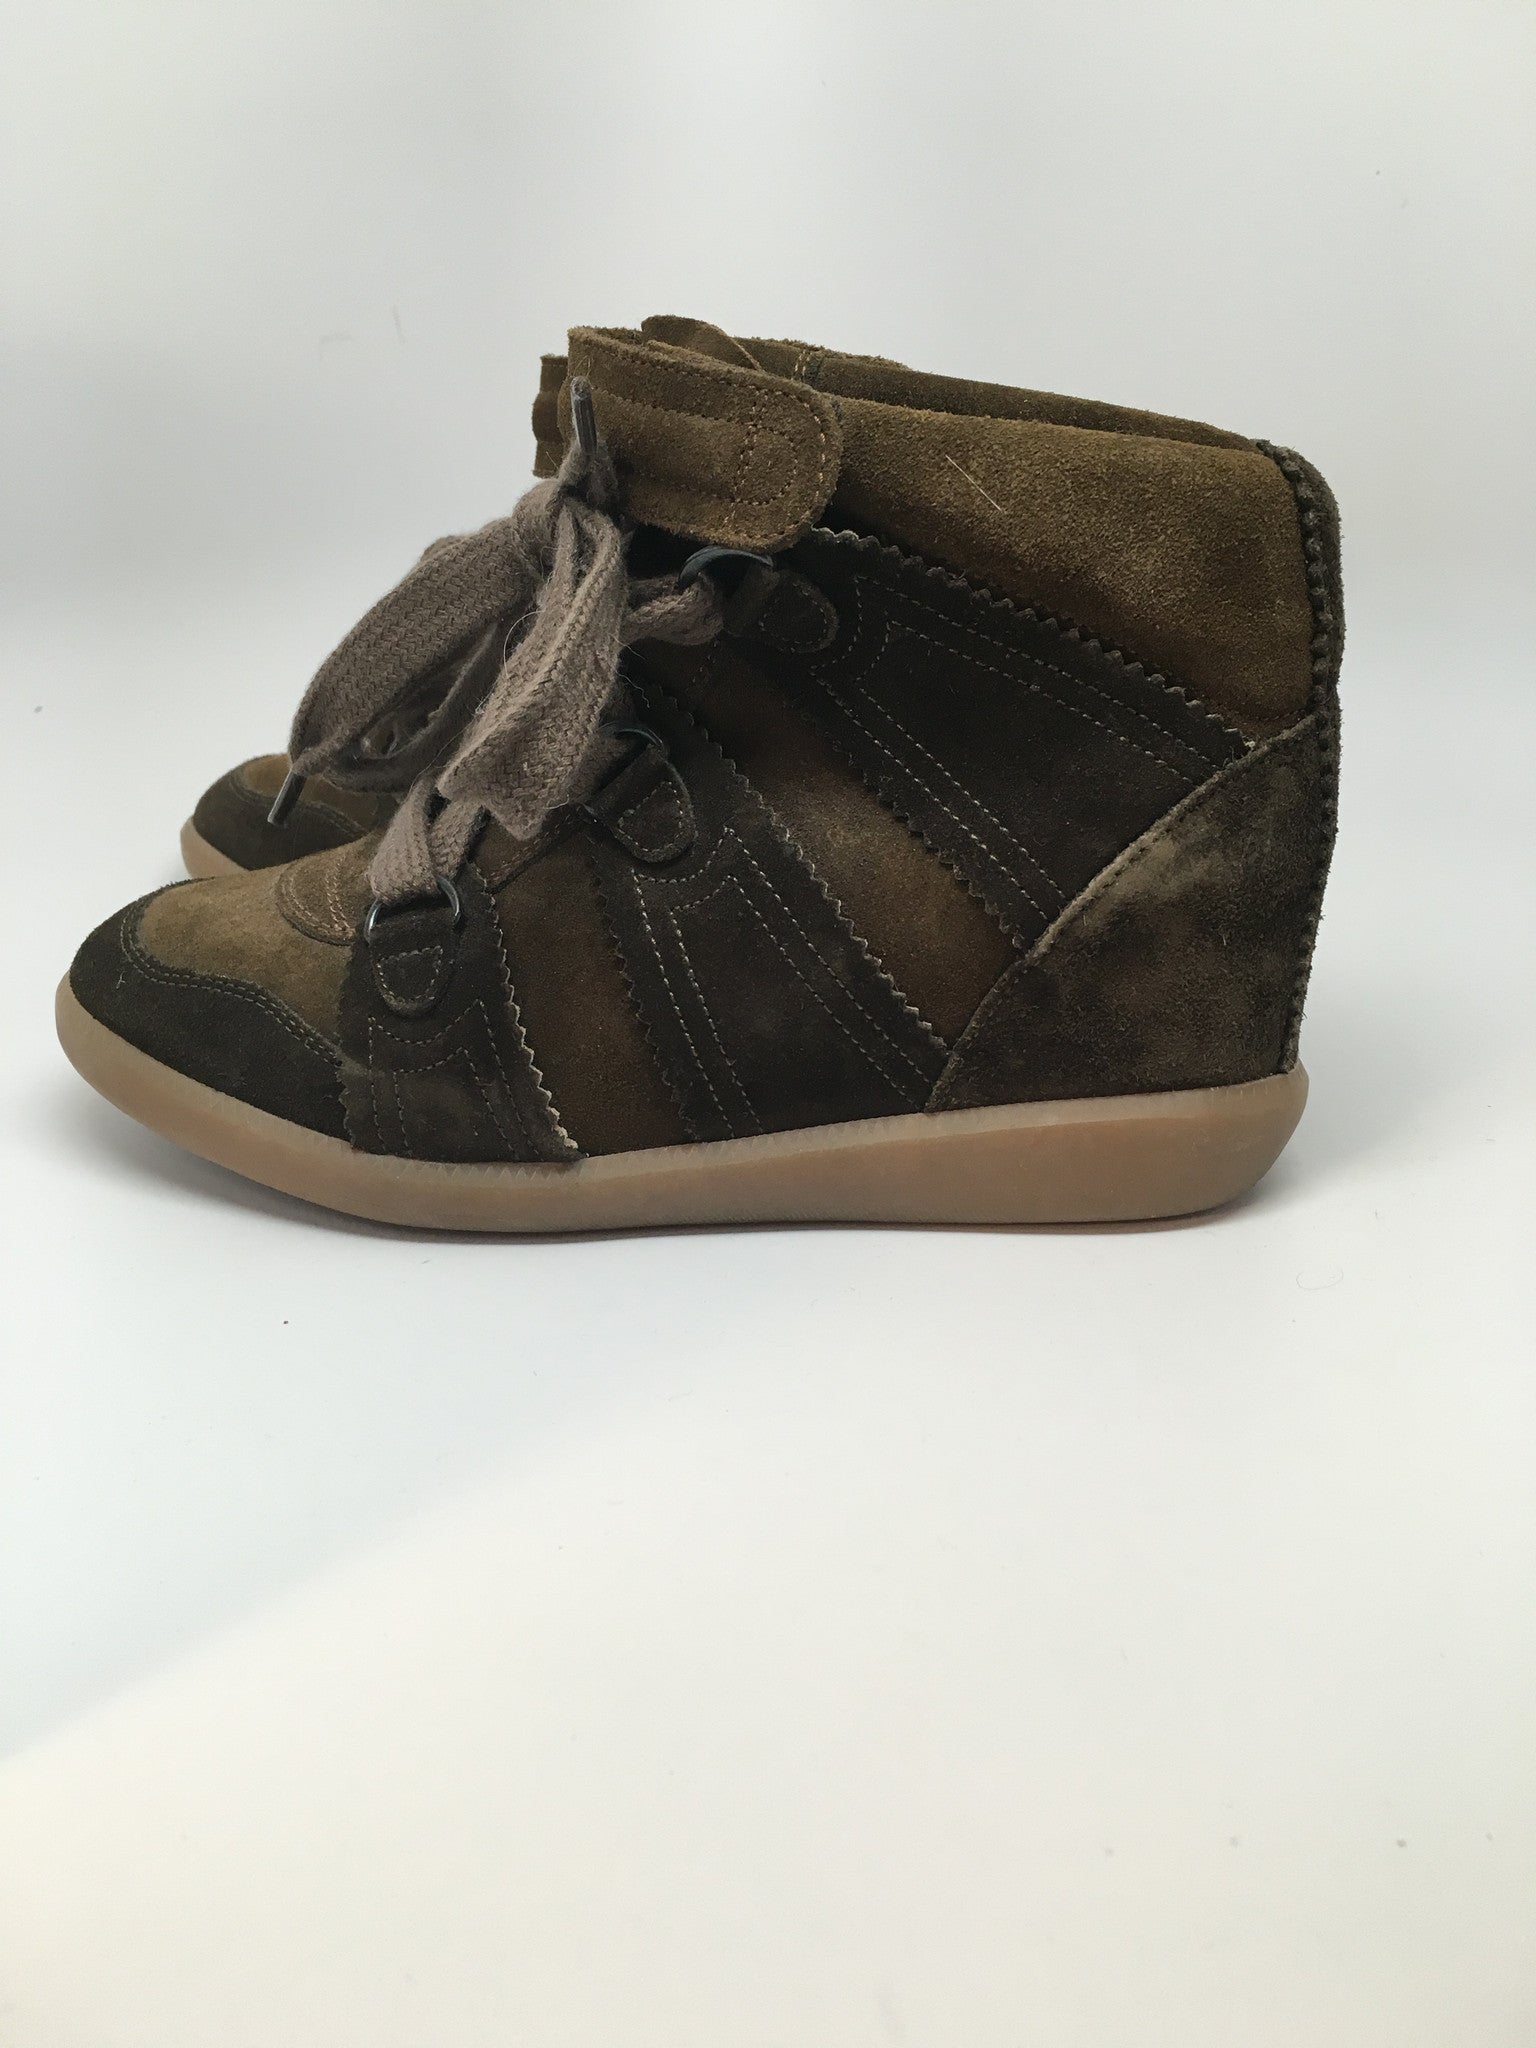 ISABEL MARANT BOBBY SNEAKERS - BROWN - SIZE 37 – Hebster Boutique